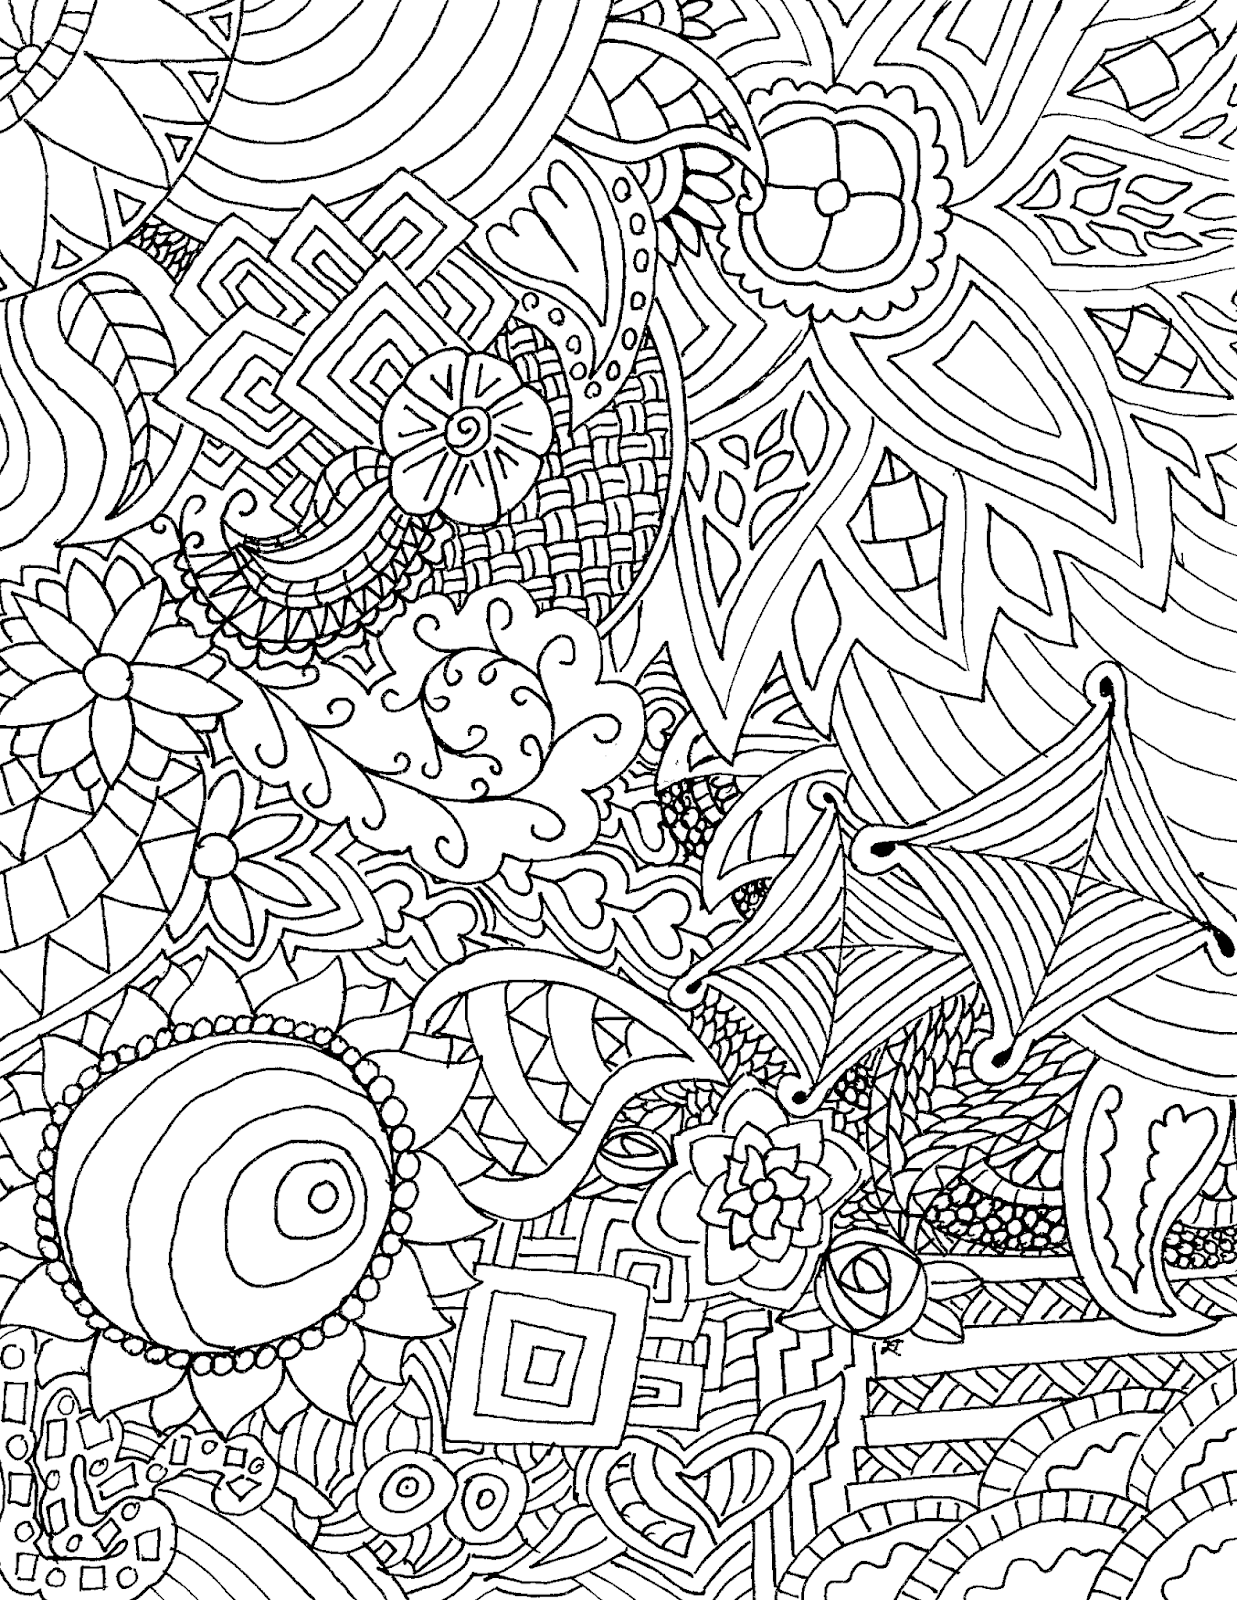 summer-art-challenge-zentangle-zentangle-patterns-pattern-coloring-pages-coloring-pages